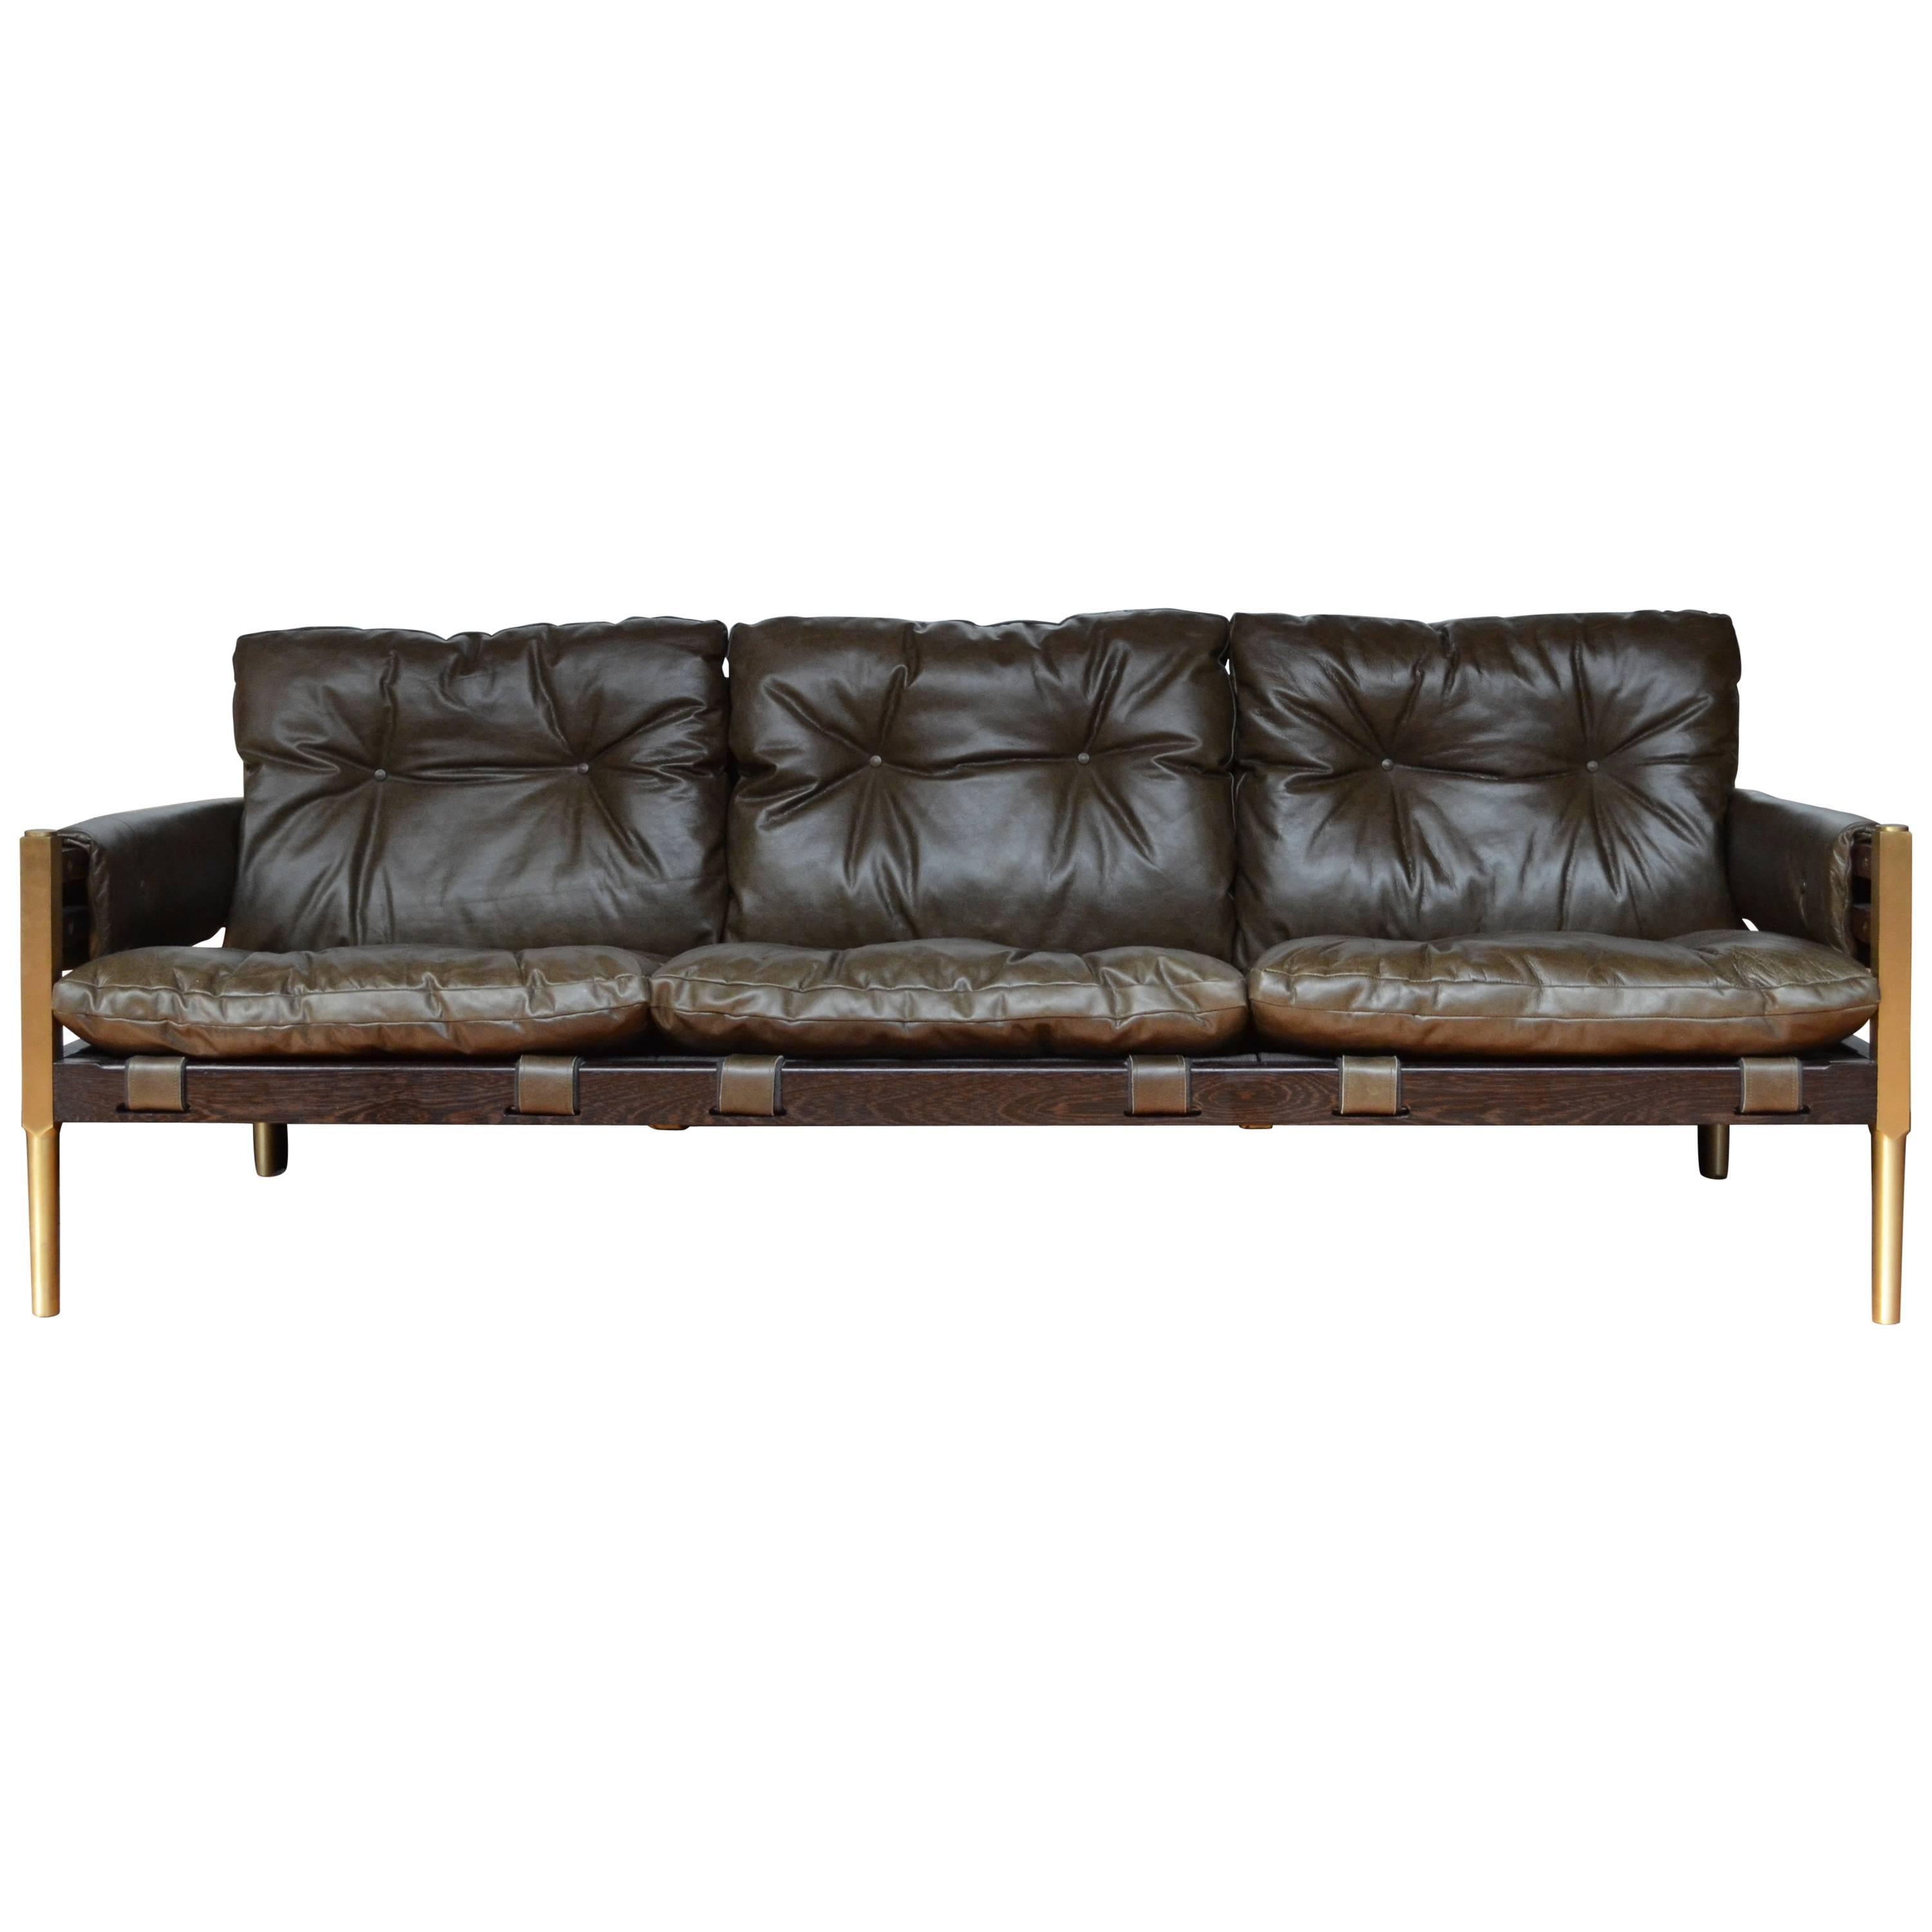 Brazilian Mid-Century Modern Inspired Campanha Sofa in Leather For Sale